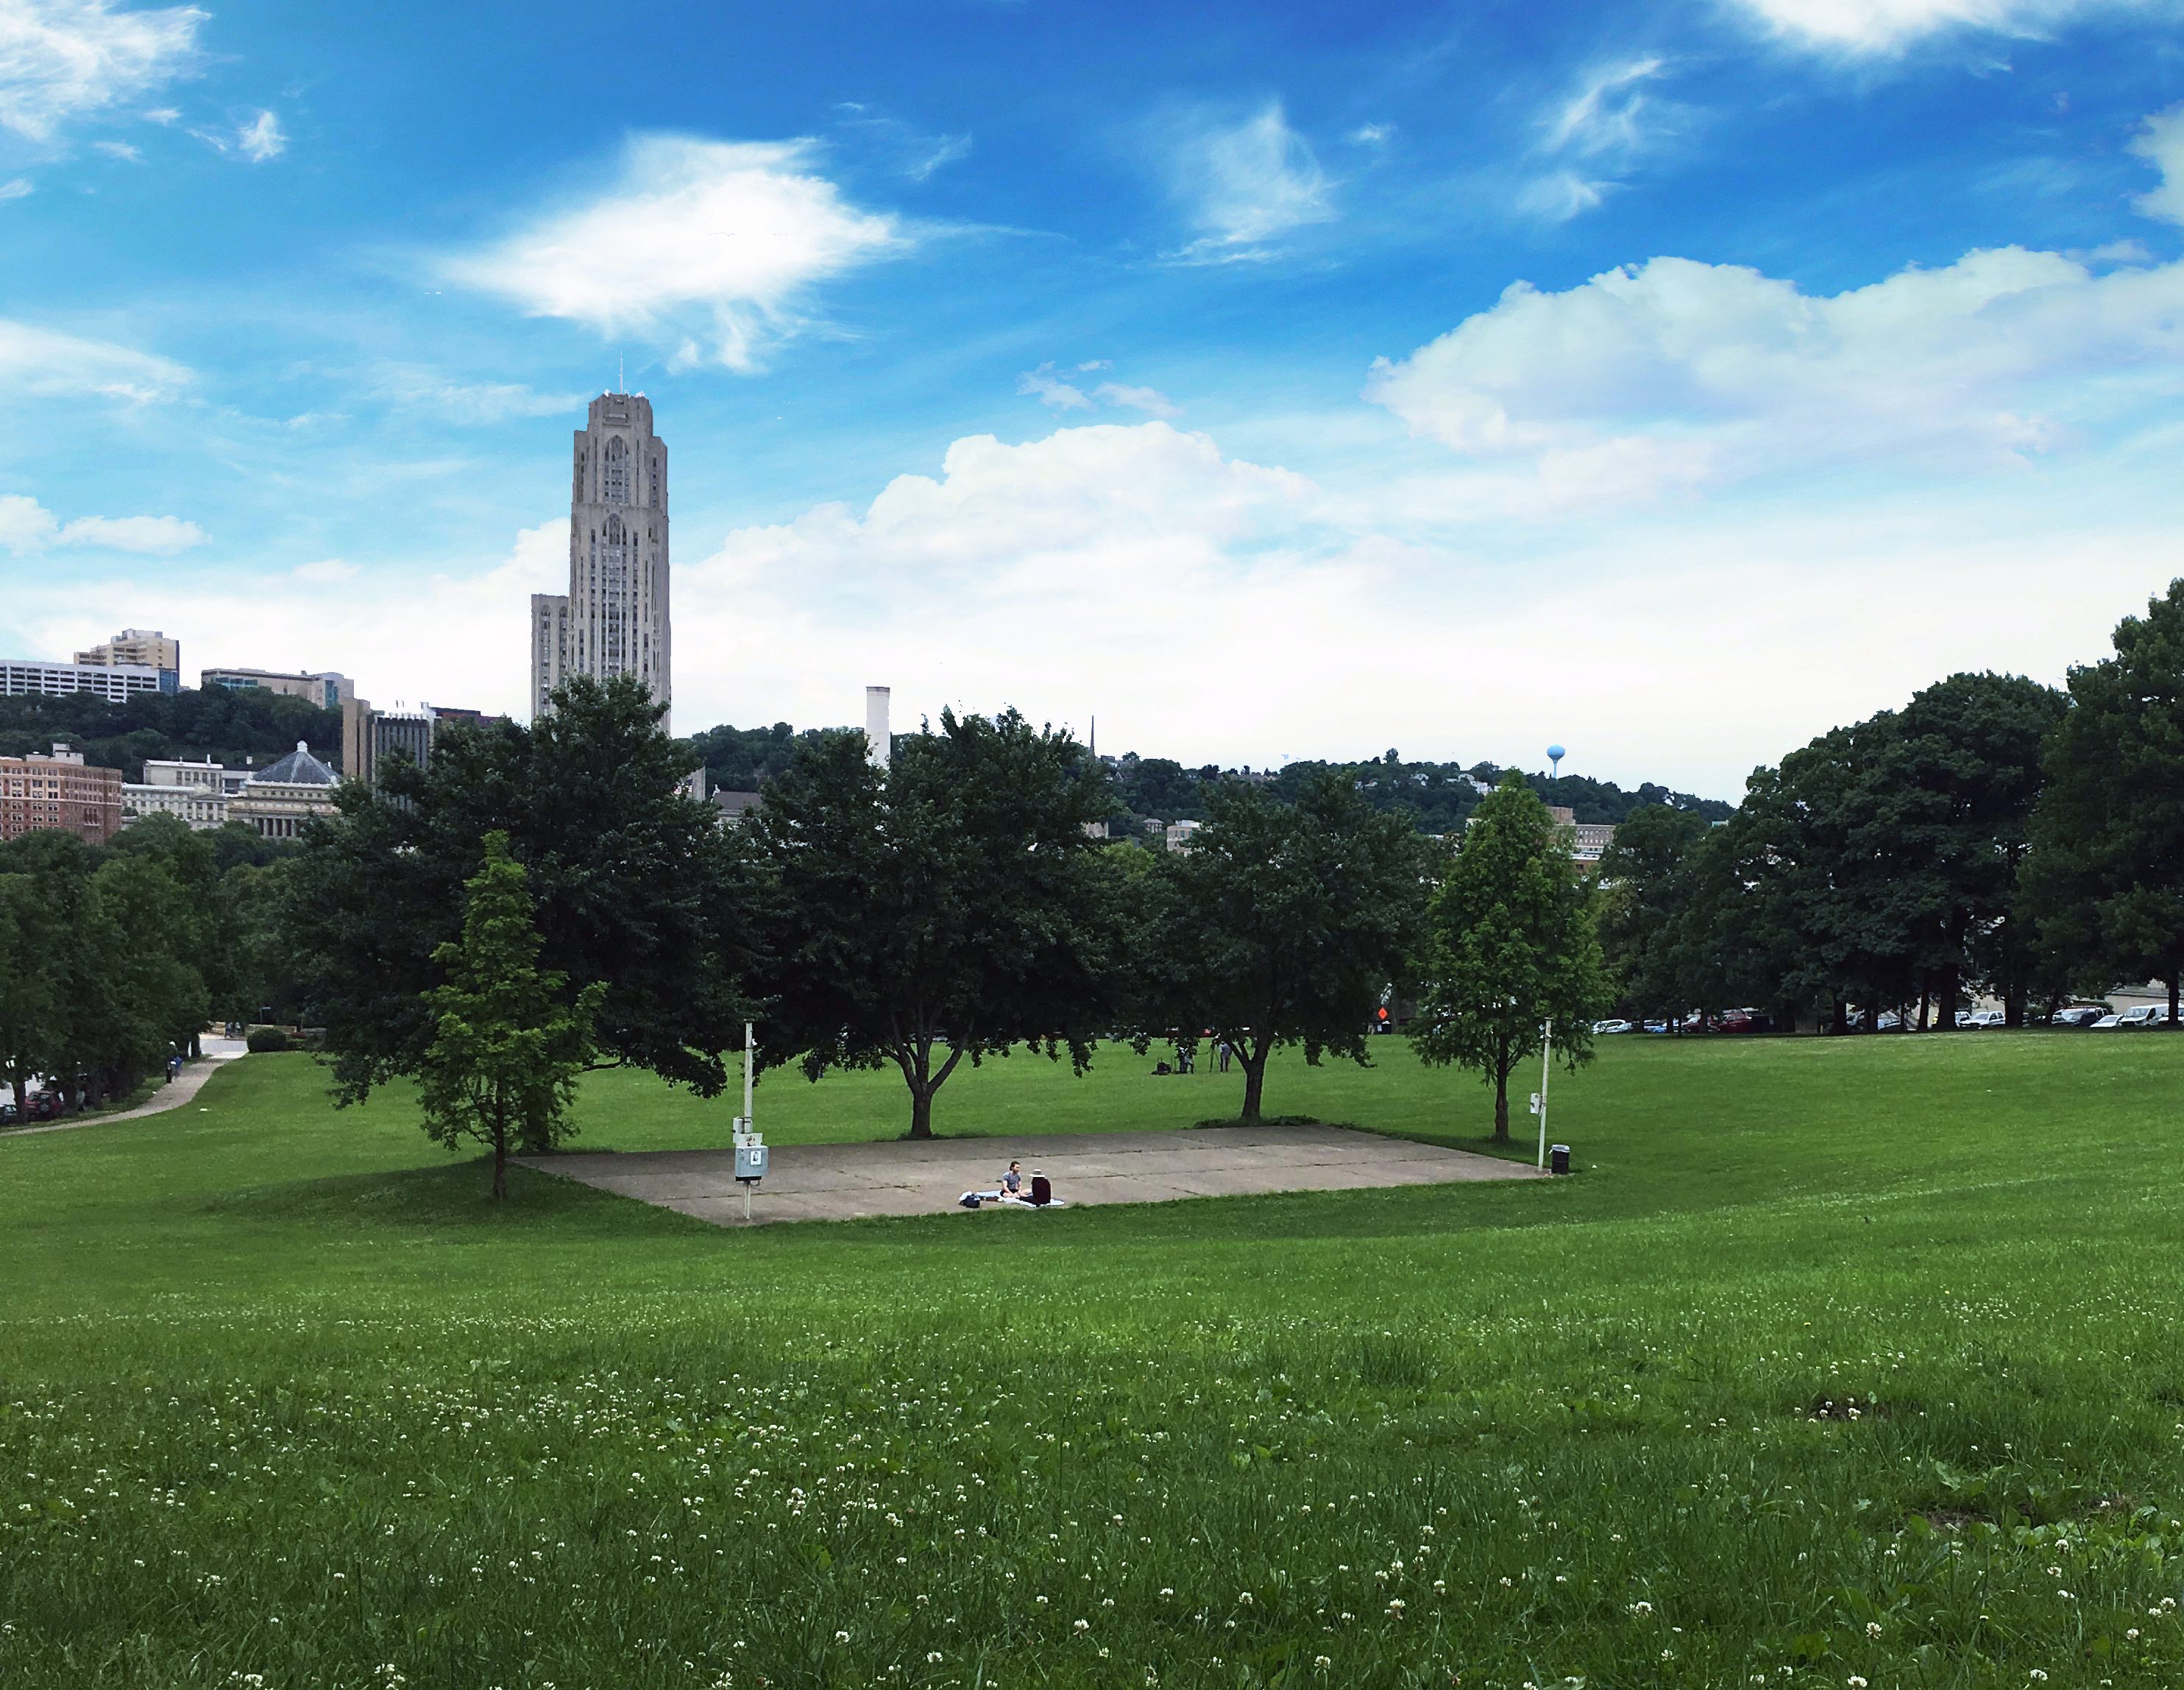 Named one of “America’s Coolest City Parks,” Schenley Park is one of the largest parks in Pittsburgh.